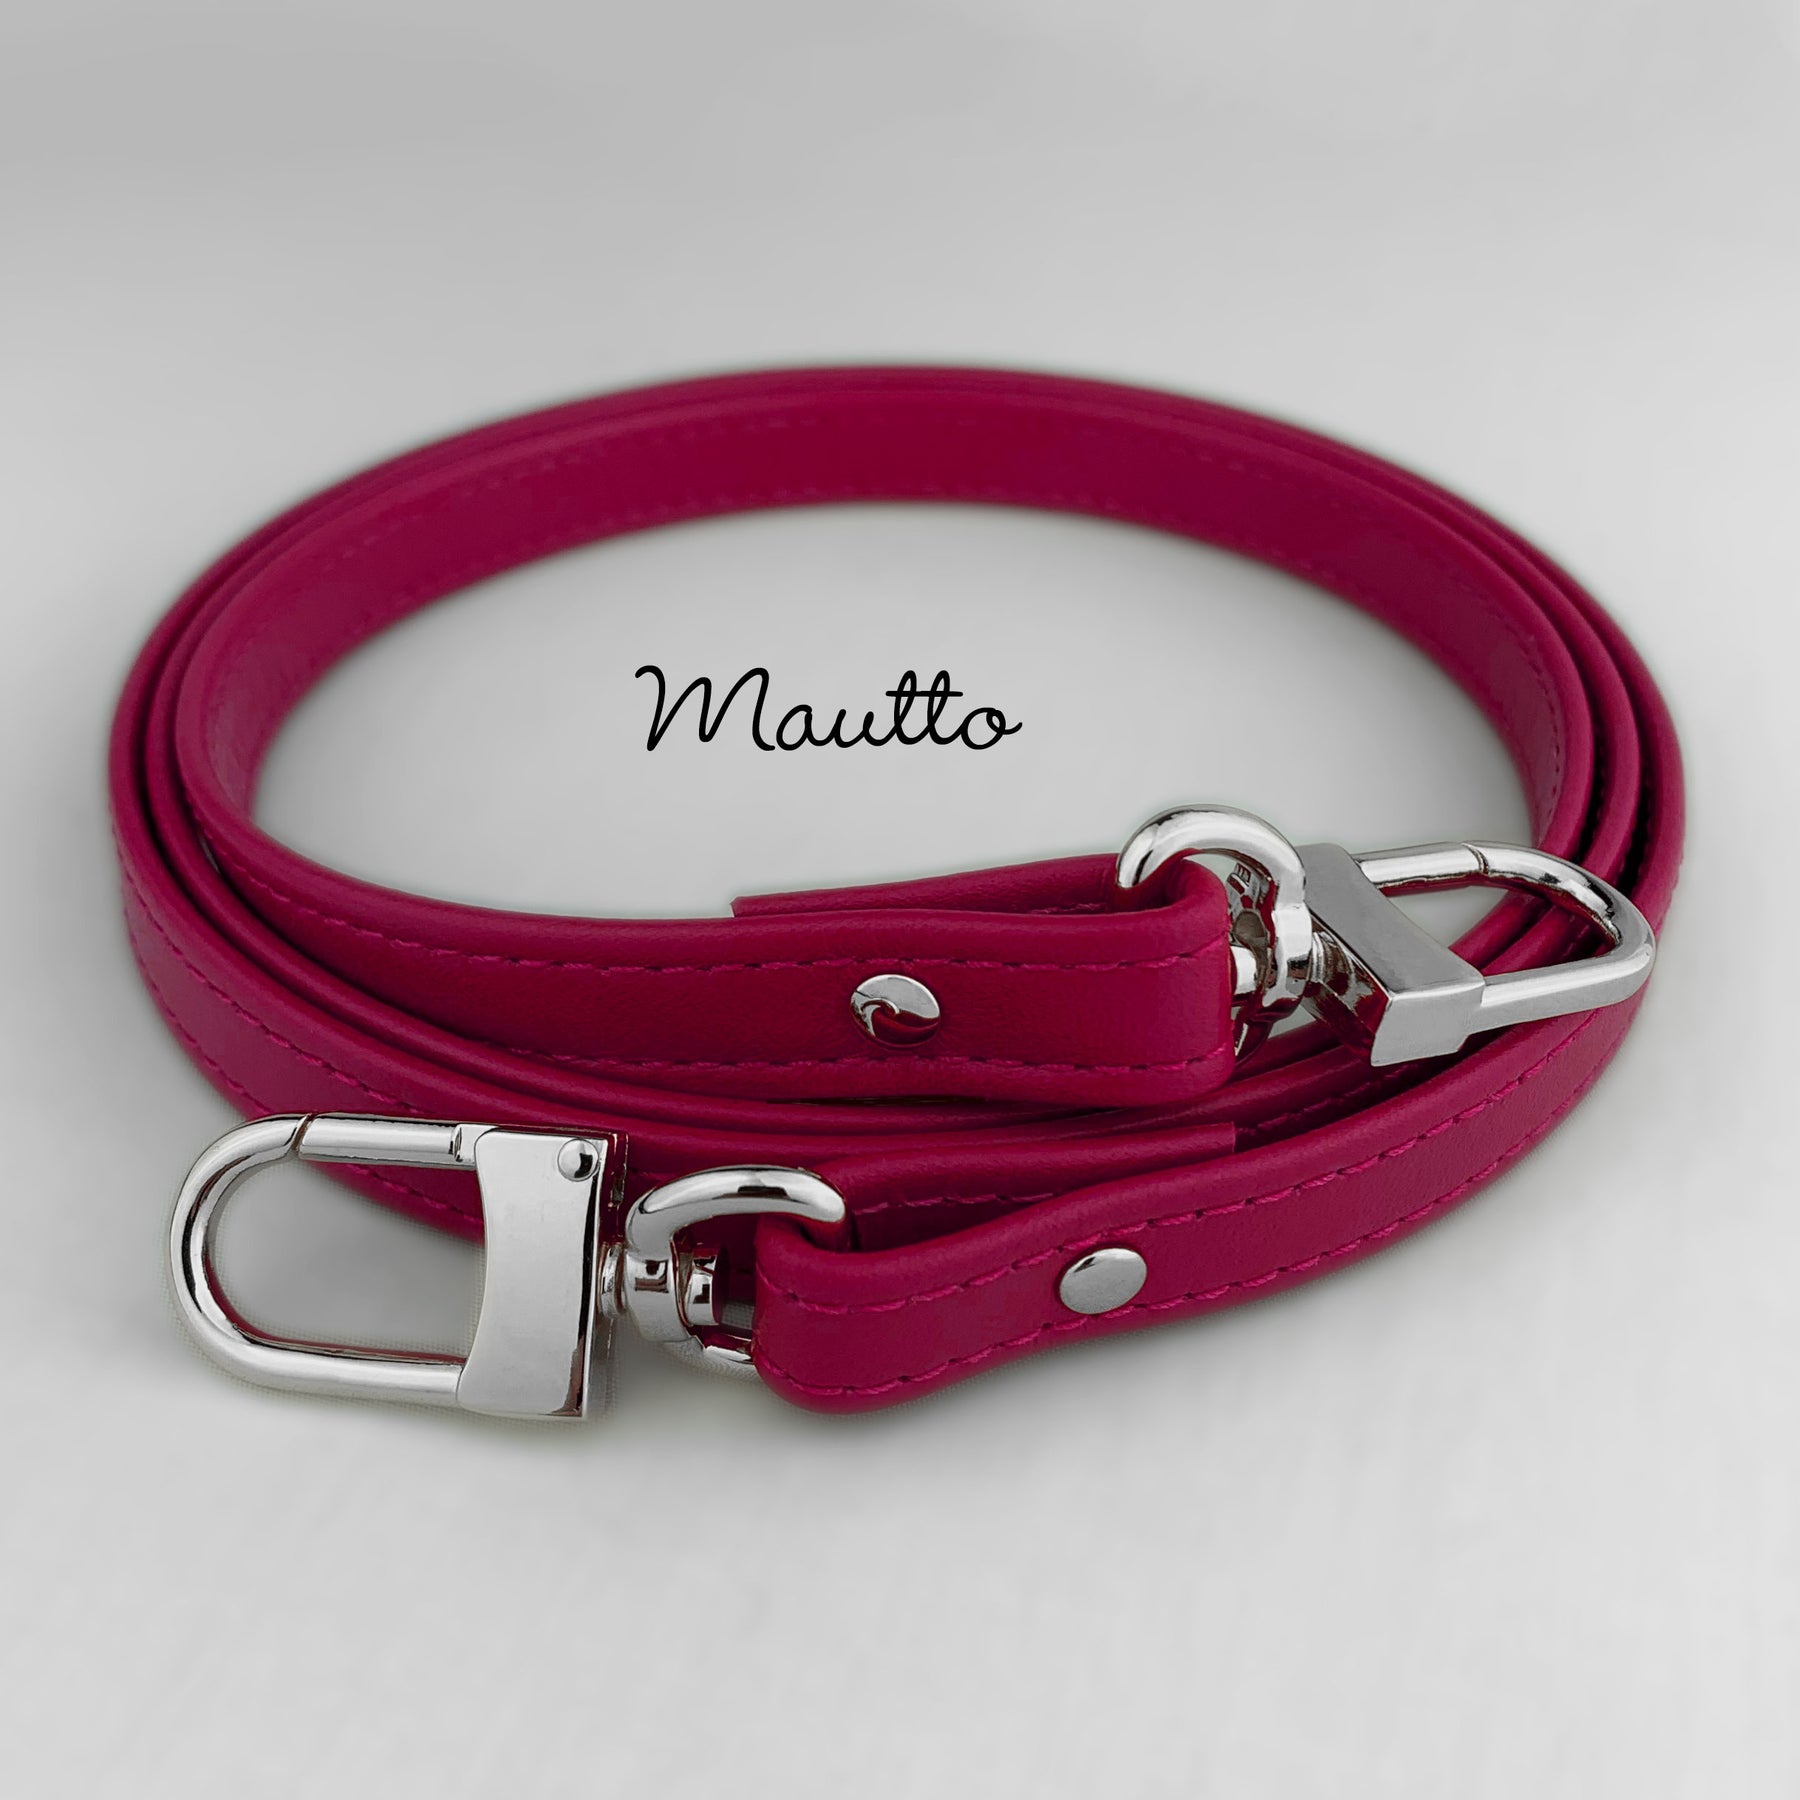 Short Crossbody Straps - A Trendy/Fashionable New Way to Carry Bags! –  Mautto